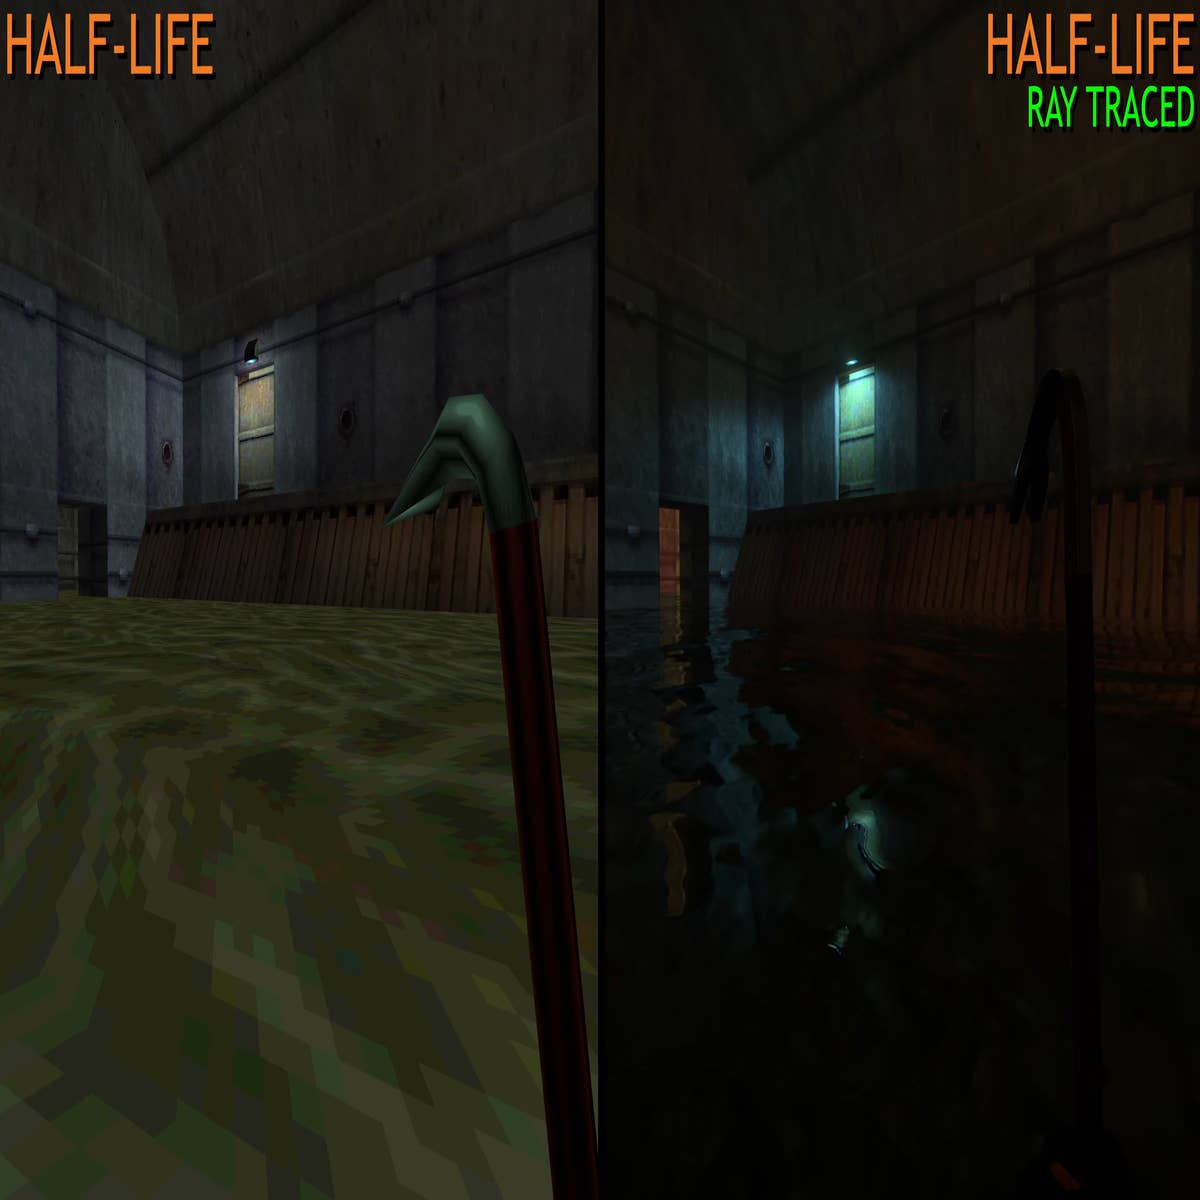 Half-Life mod adds real-time ray tracing to Valve's seminal first